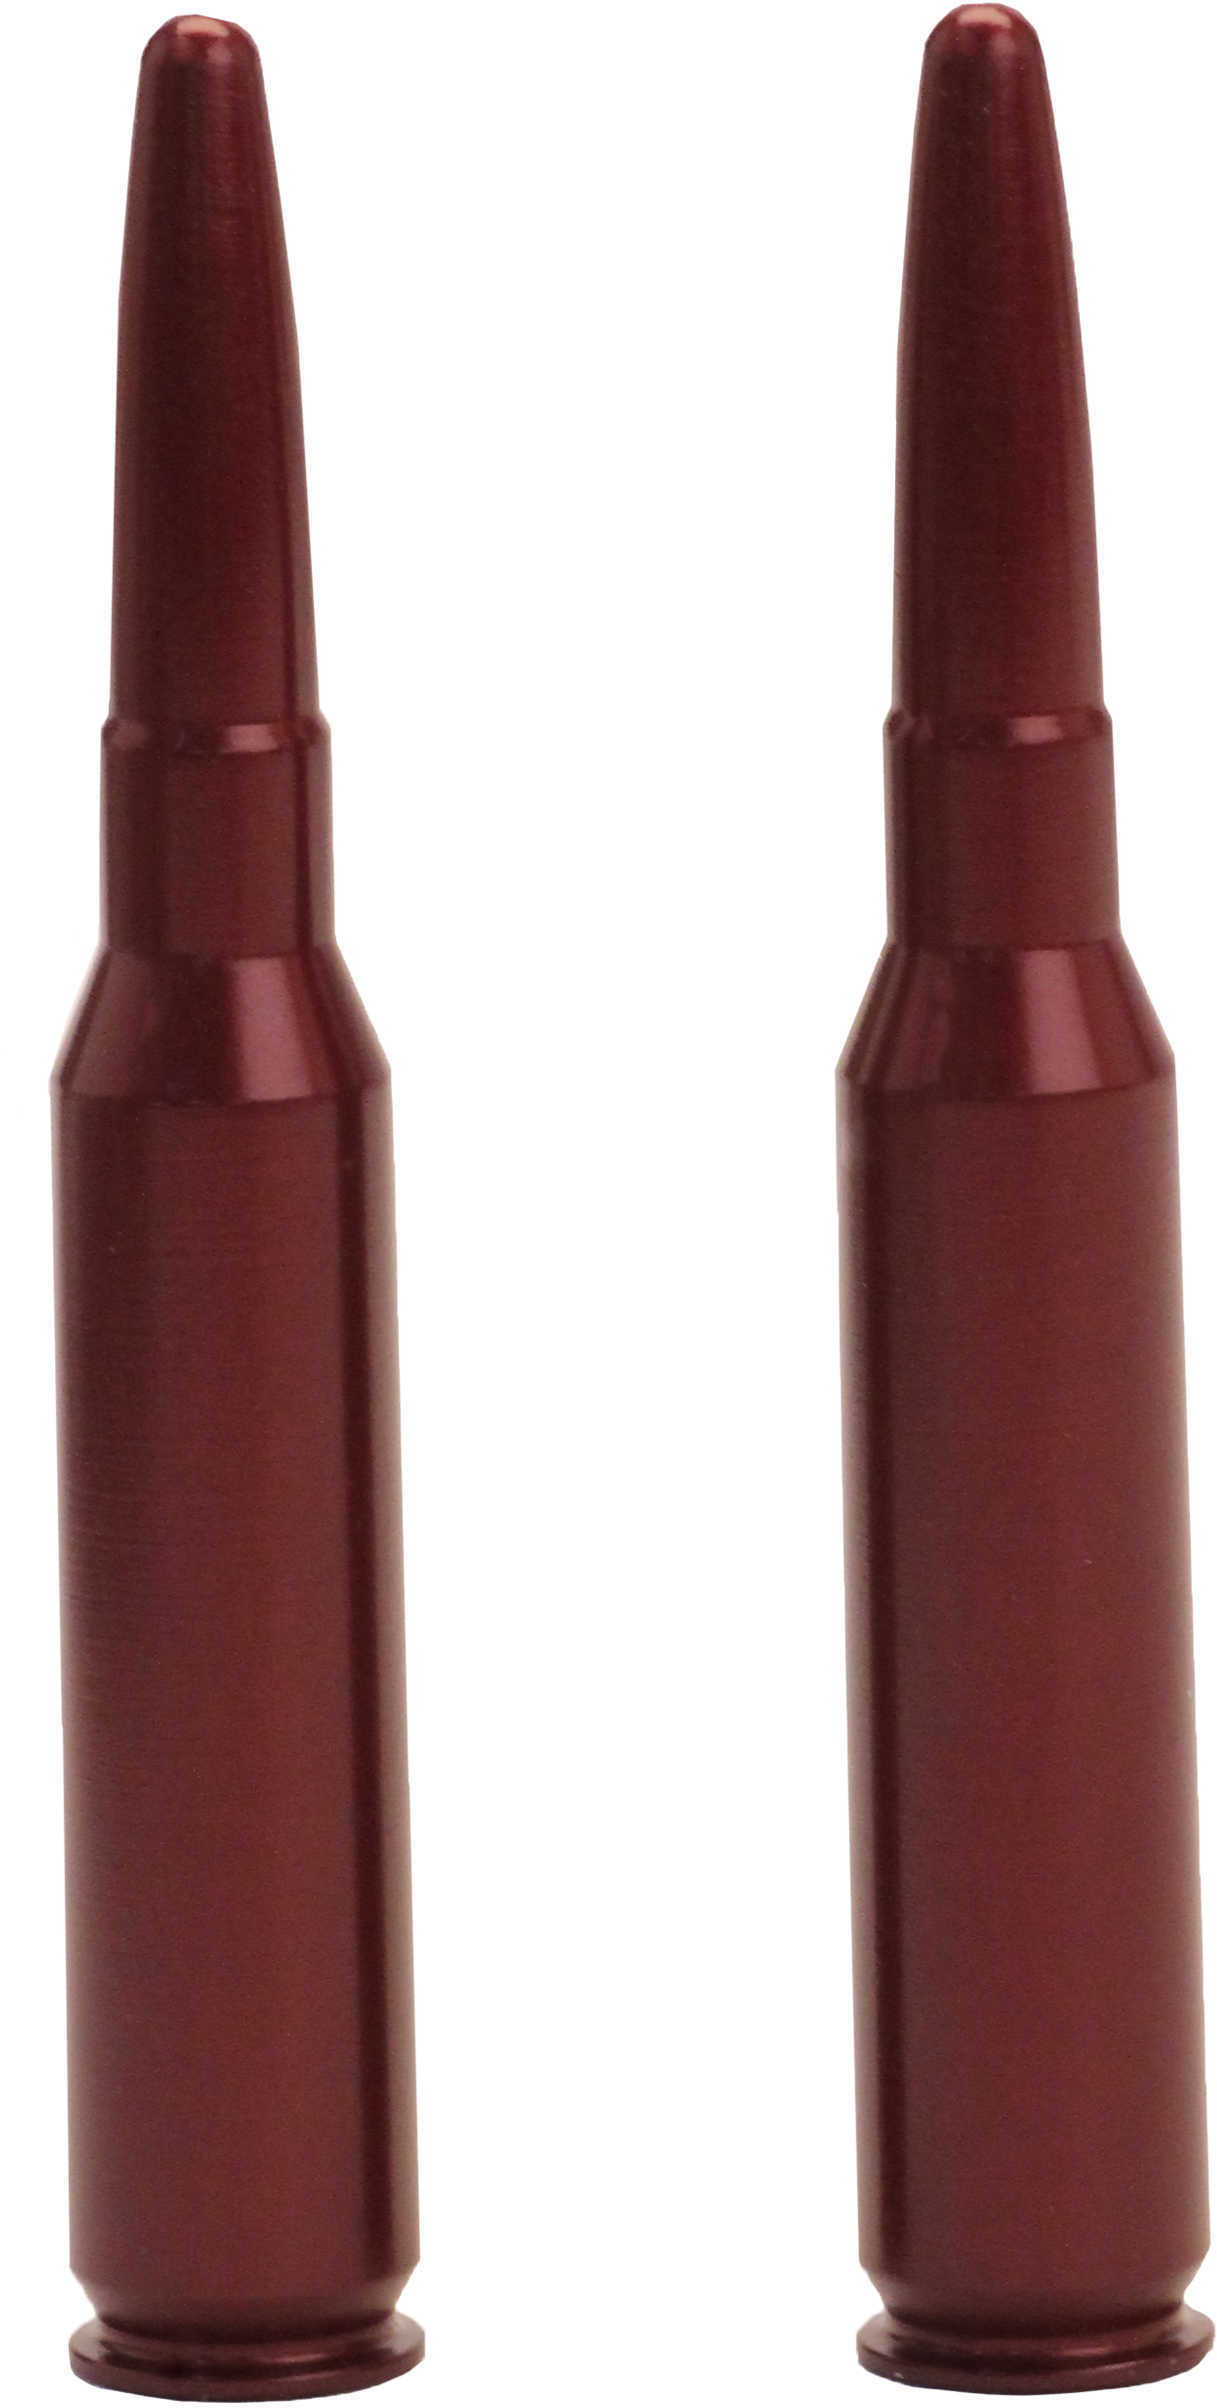 A-Zoom Rifle Metal Snap Caps 6.5 Carano, Pack of 2 Md: 12291